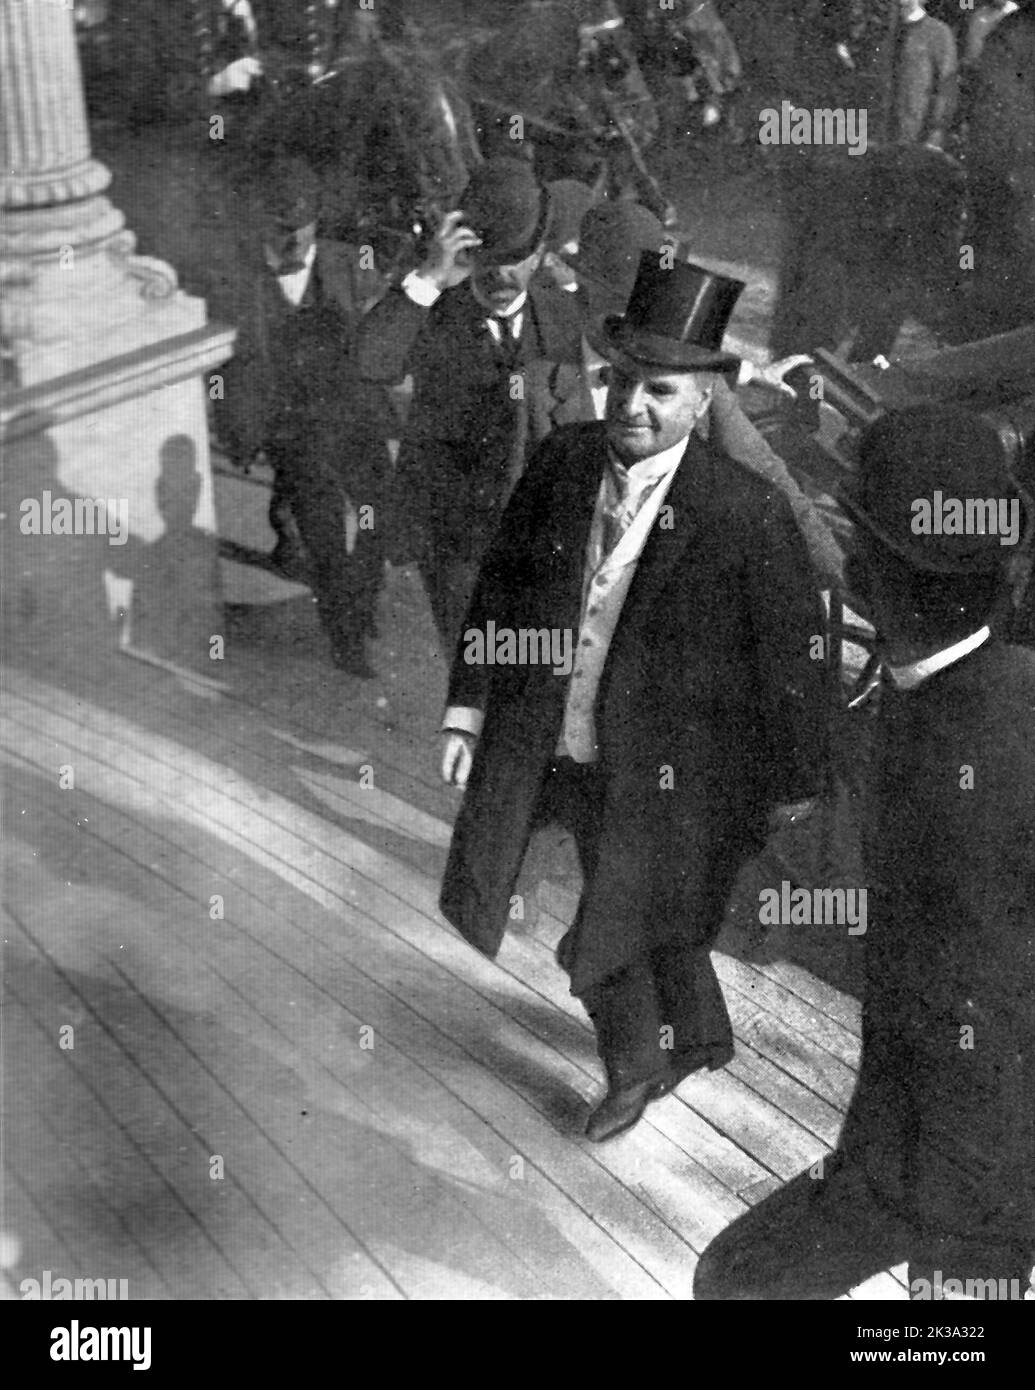 McKinley entering the Temple of Music on September 6, 1901, shortly before the shots were fired Stock Photo